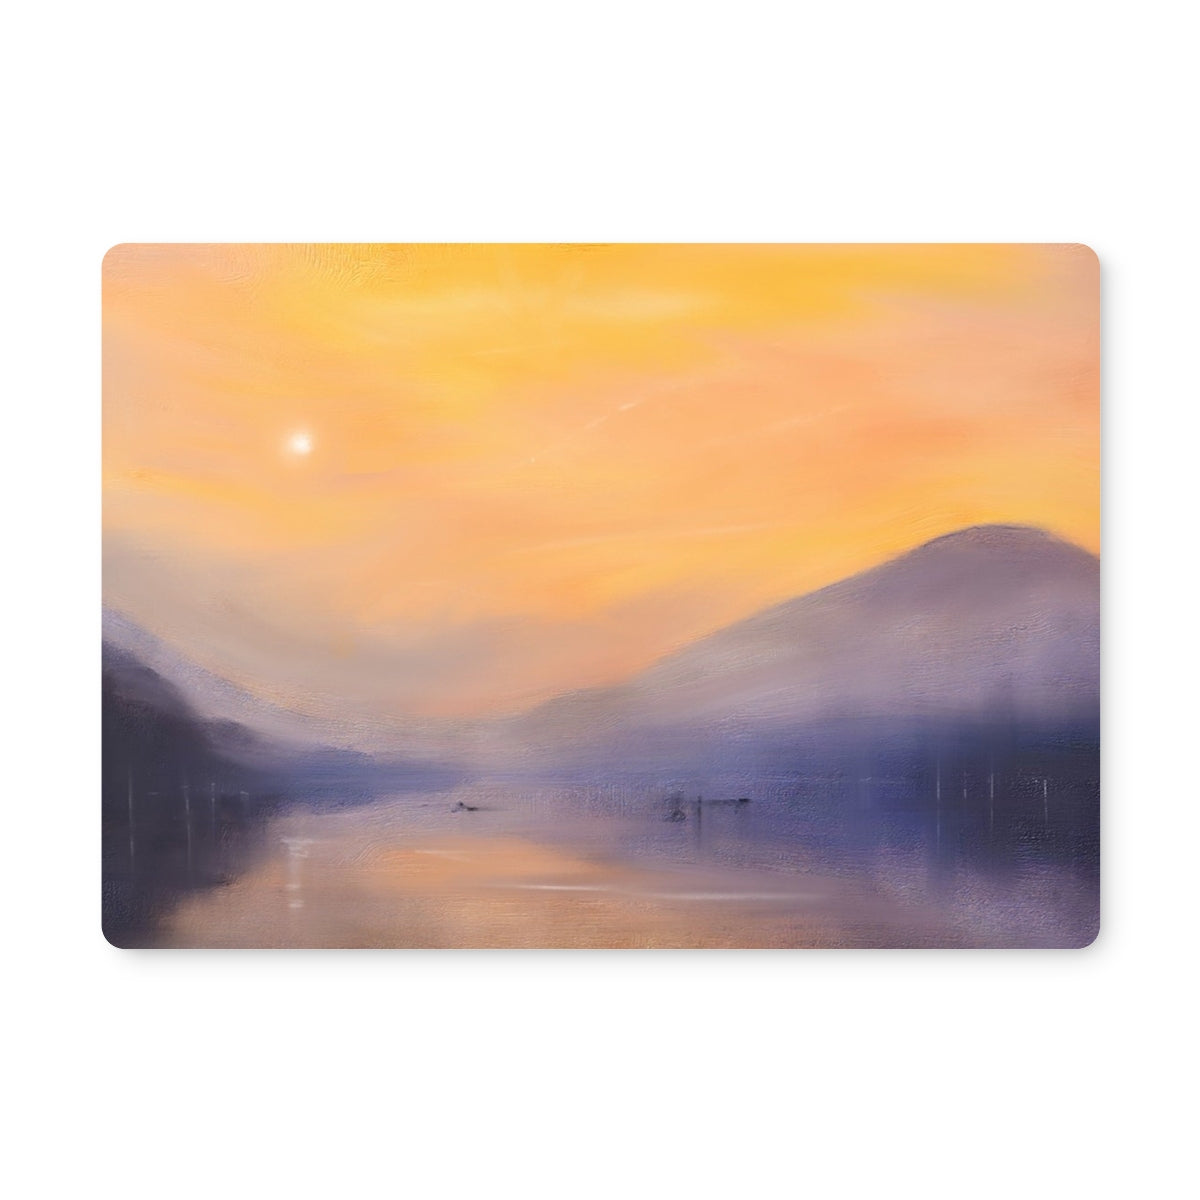 Loch Eck Dusk Art Gifts Placemat-Placemats-Scottish Lochs & Mountains Art Gallery-Single Placemat-Paintings, Prints, Homeware, Art Gifts From Scotland By Scottish Artist Kevin Hunter